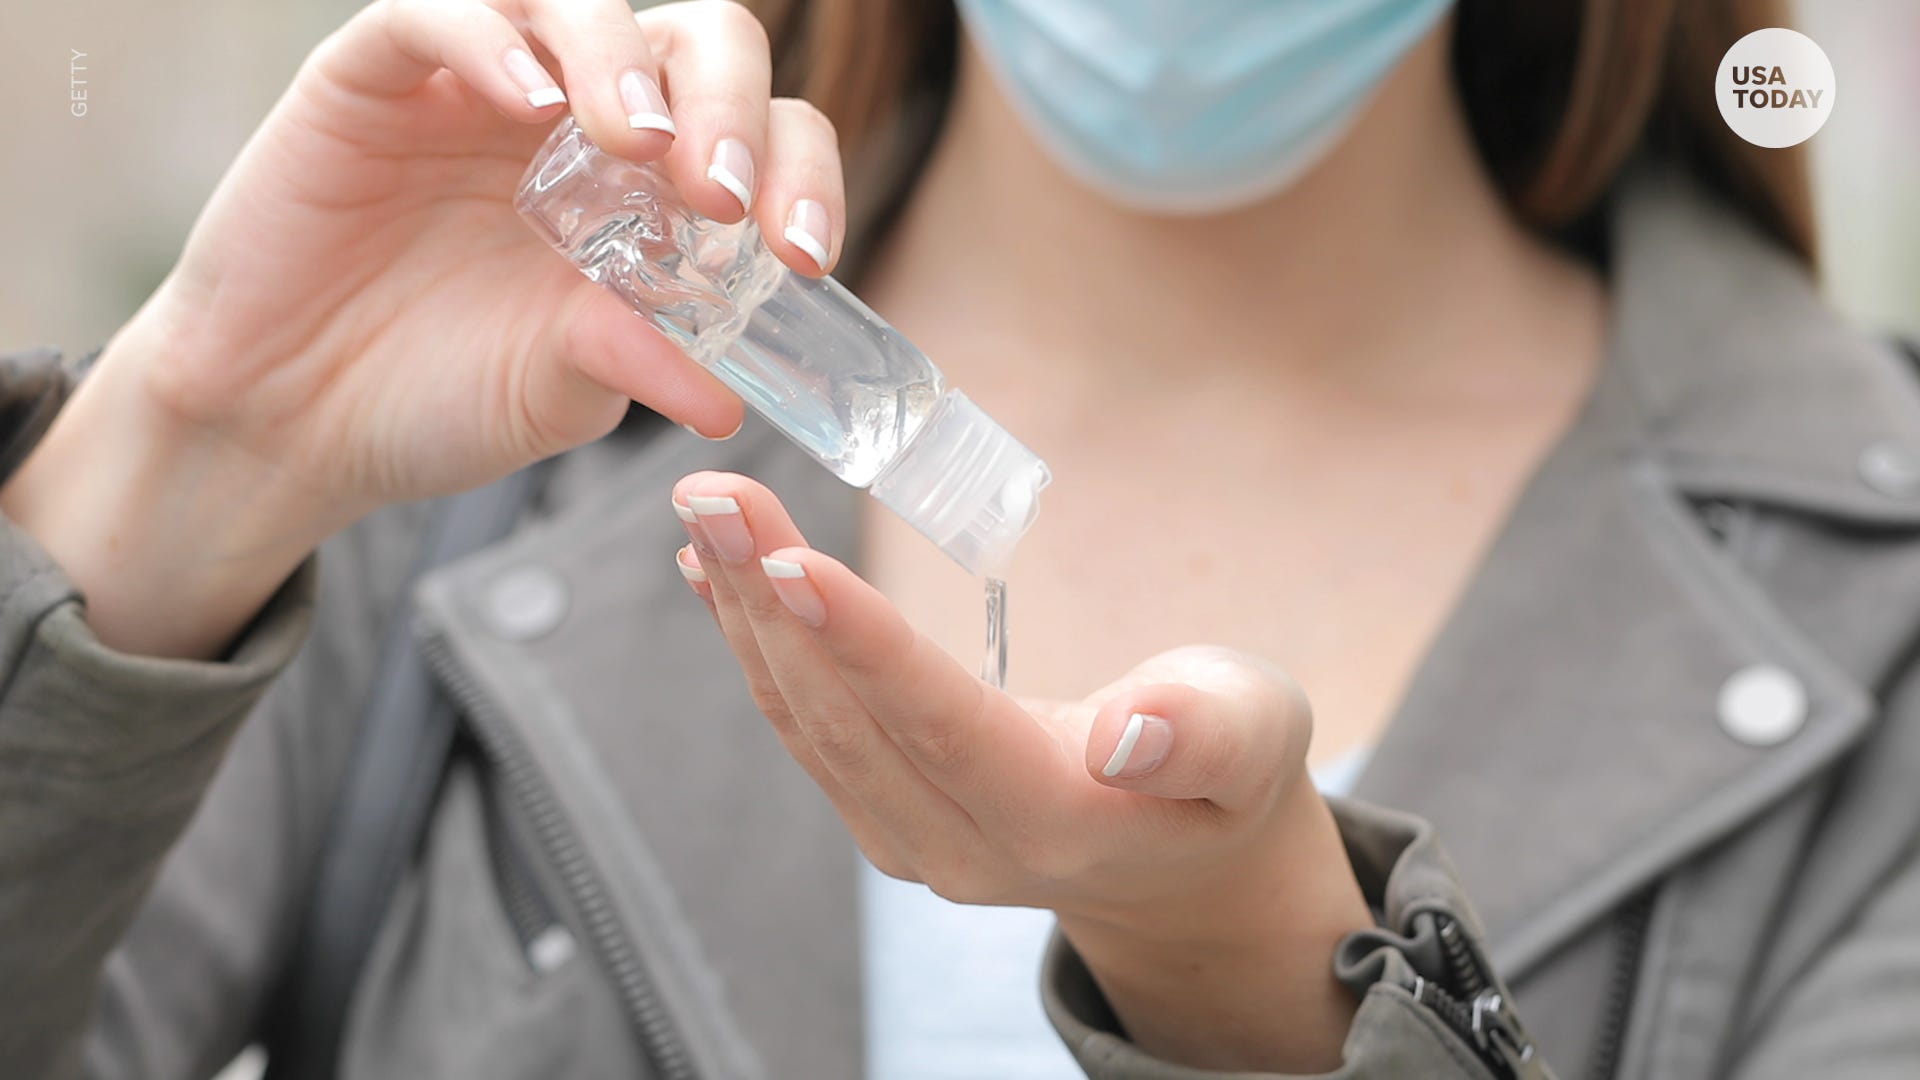 Poisonous hand sanitizer: FDA cautions buyers to stay away from 9 hand sanitizer brands